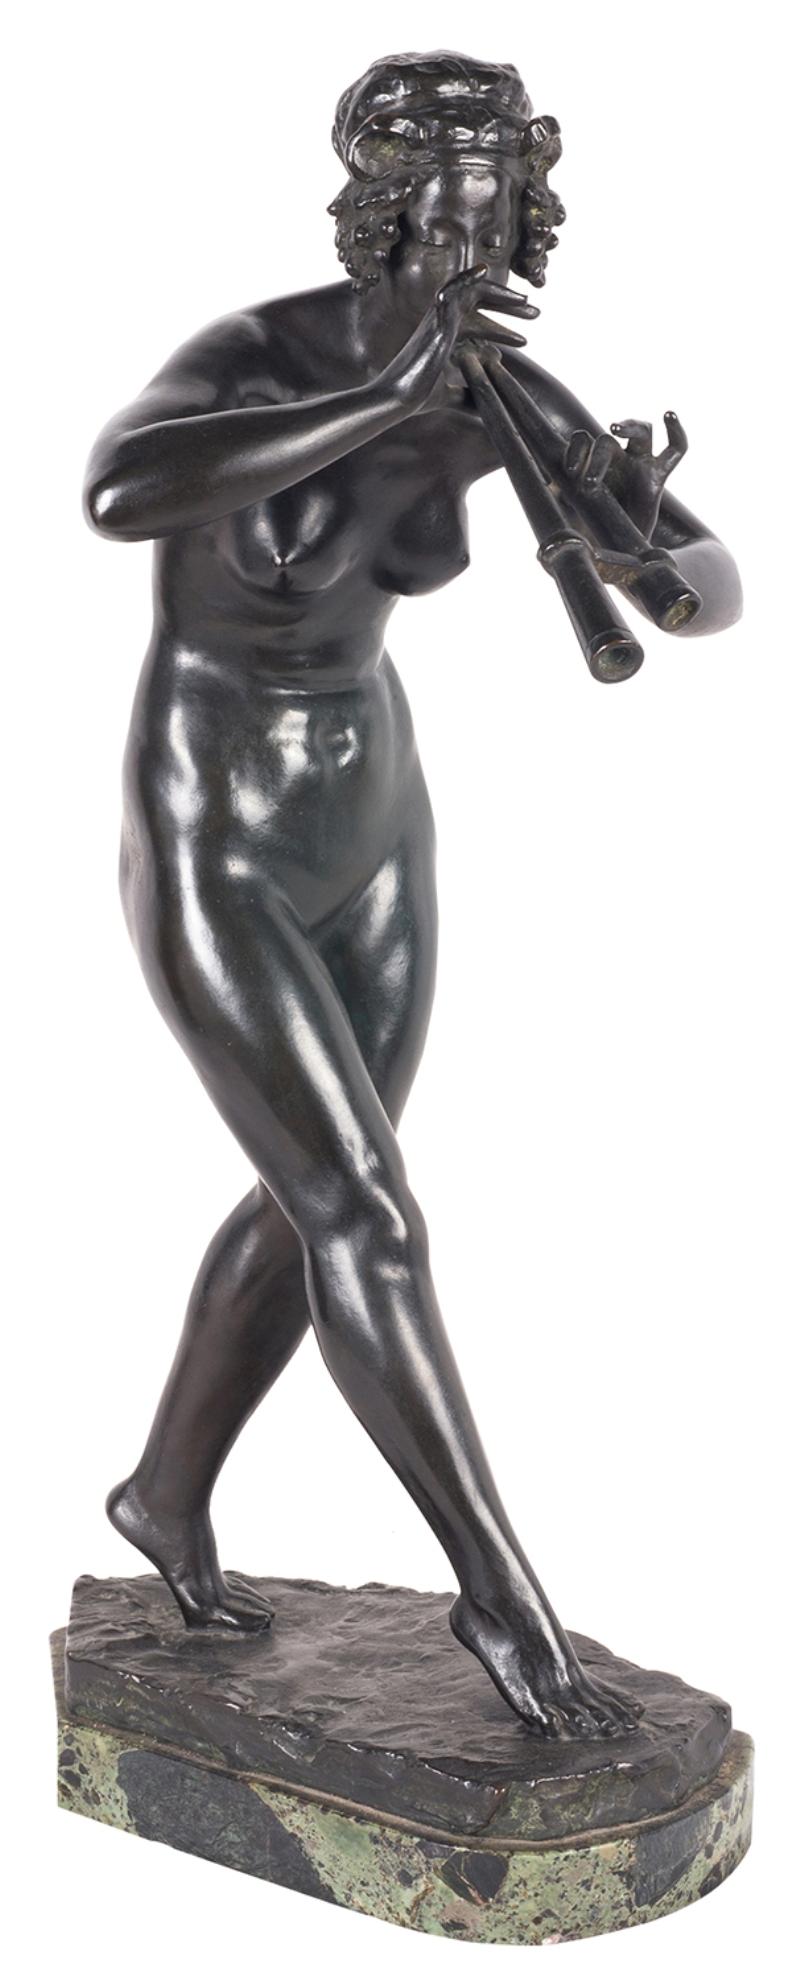 A very good quality 19th century bronze statue of a female nude statue playing the pipes, mounted on a marble plinth.